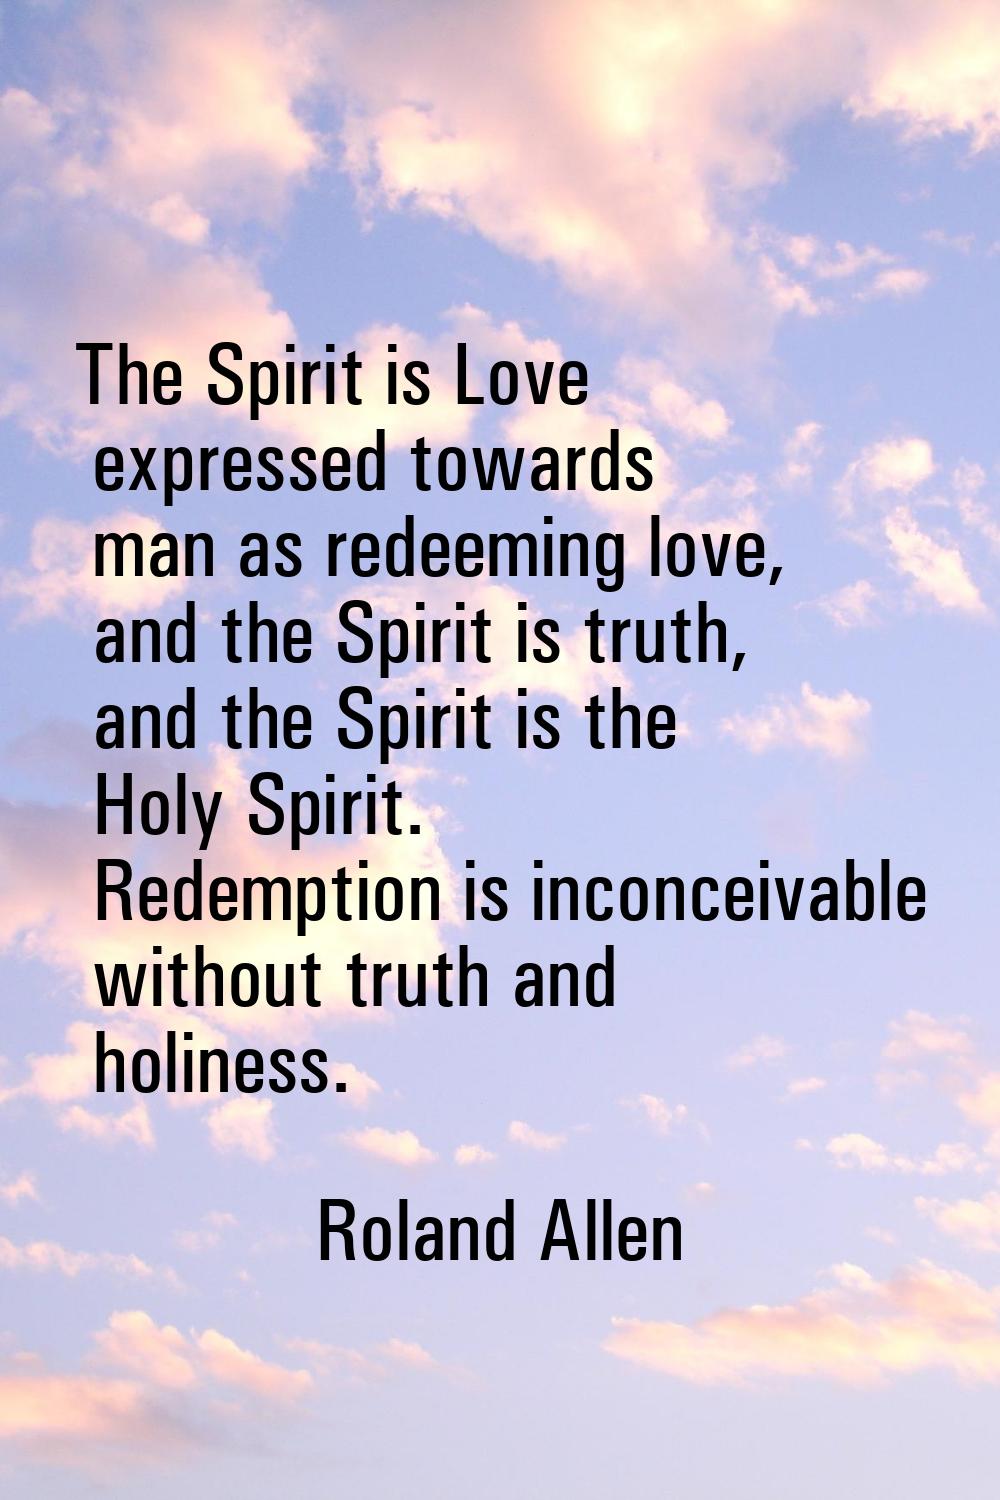 The Spirit is Love expressed towards man as redeeming love, and the Spirit is truth, and the Spirit